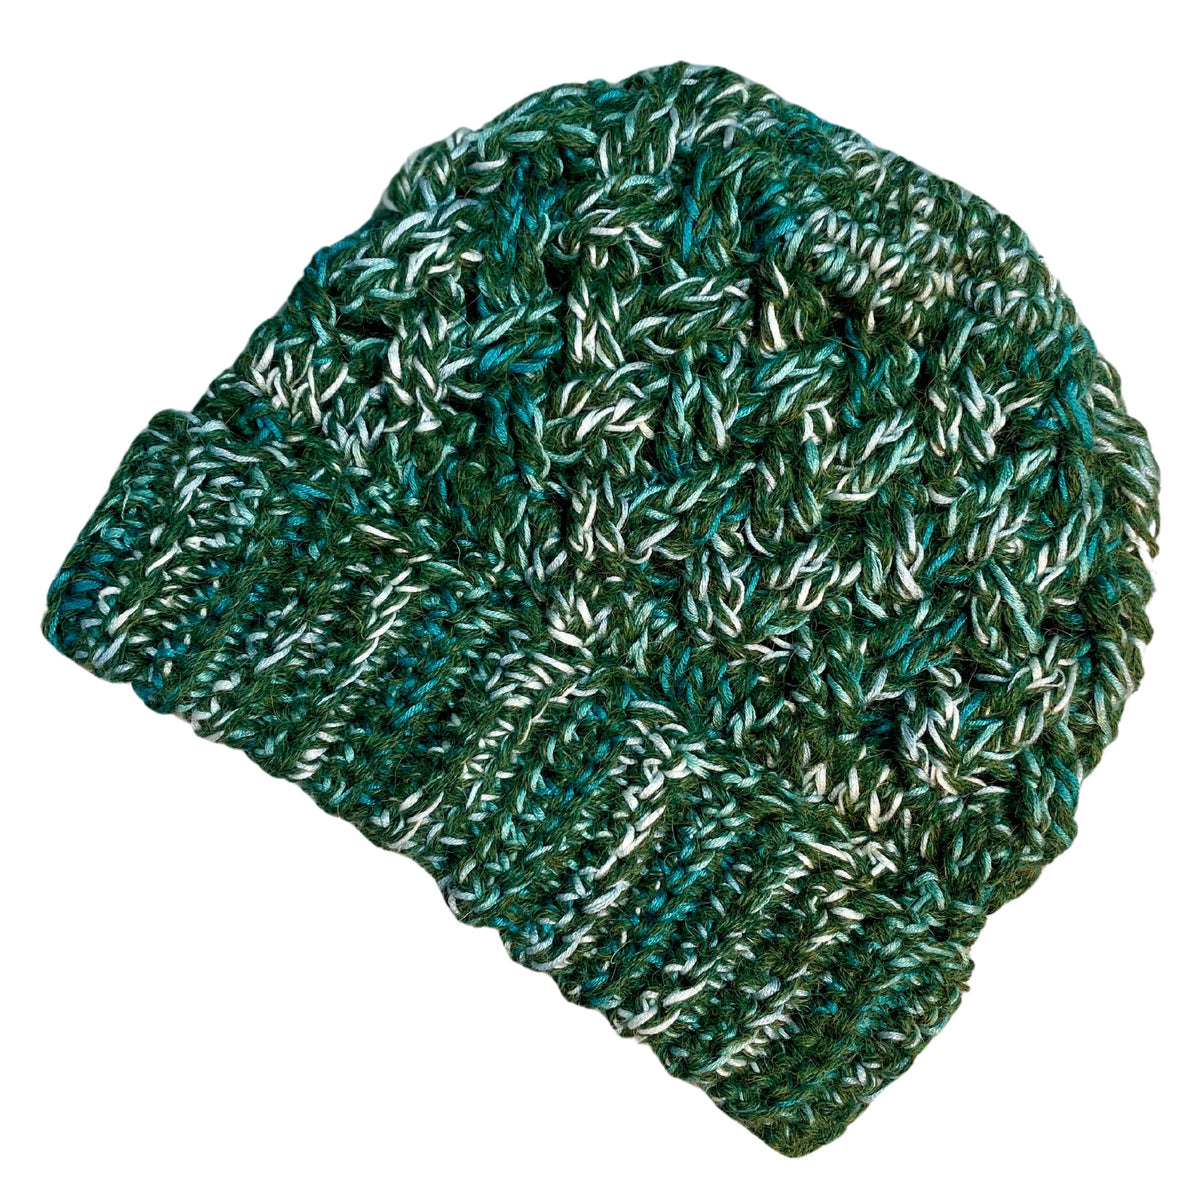 Moss green, teal, turquoise, seafoam, and white colored cozy soft warm handmade knitted crochet celtic hat made in Montana by Alpacas of Montana.